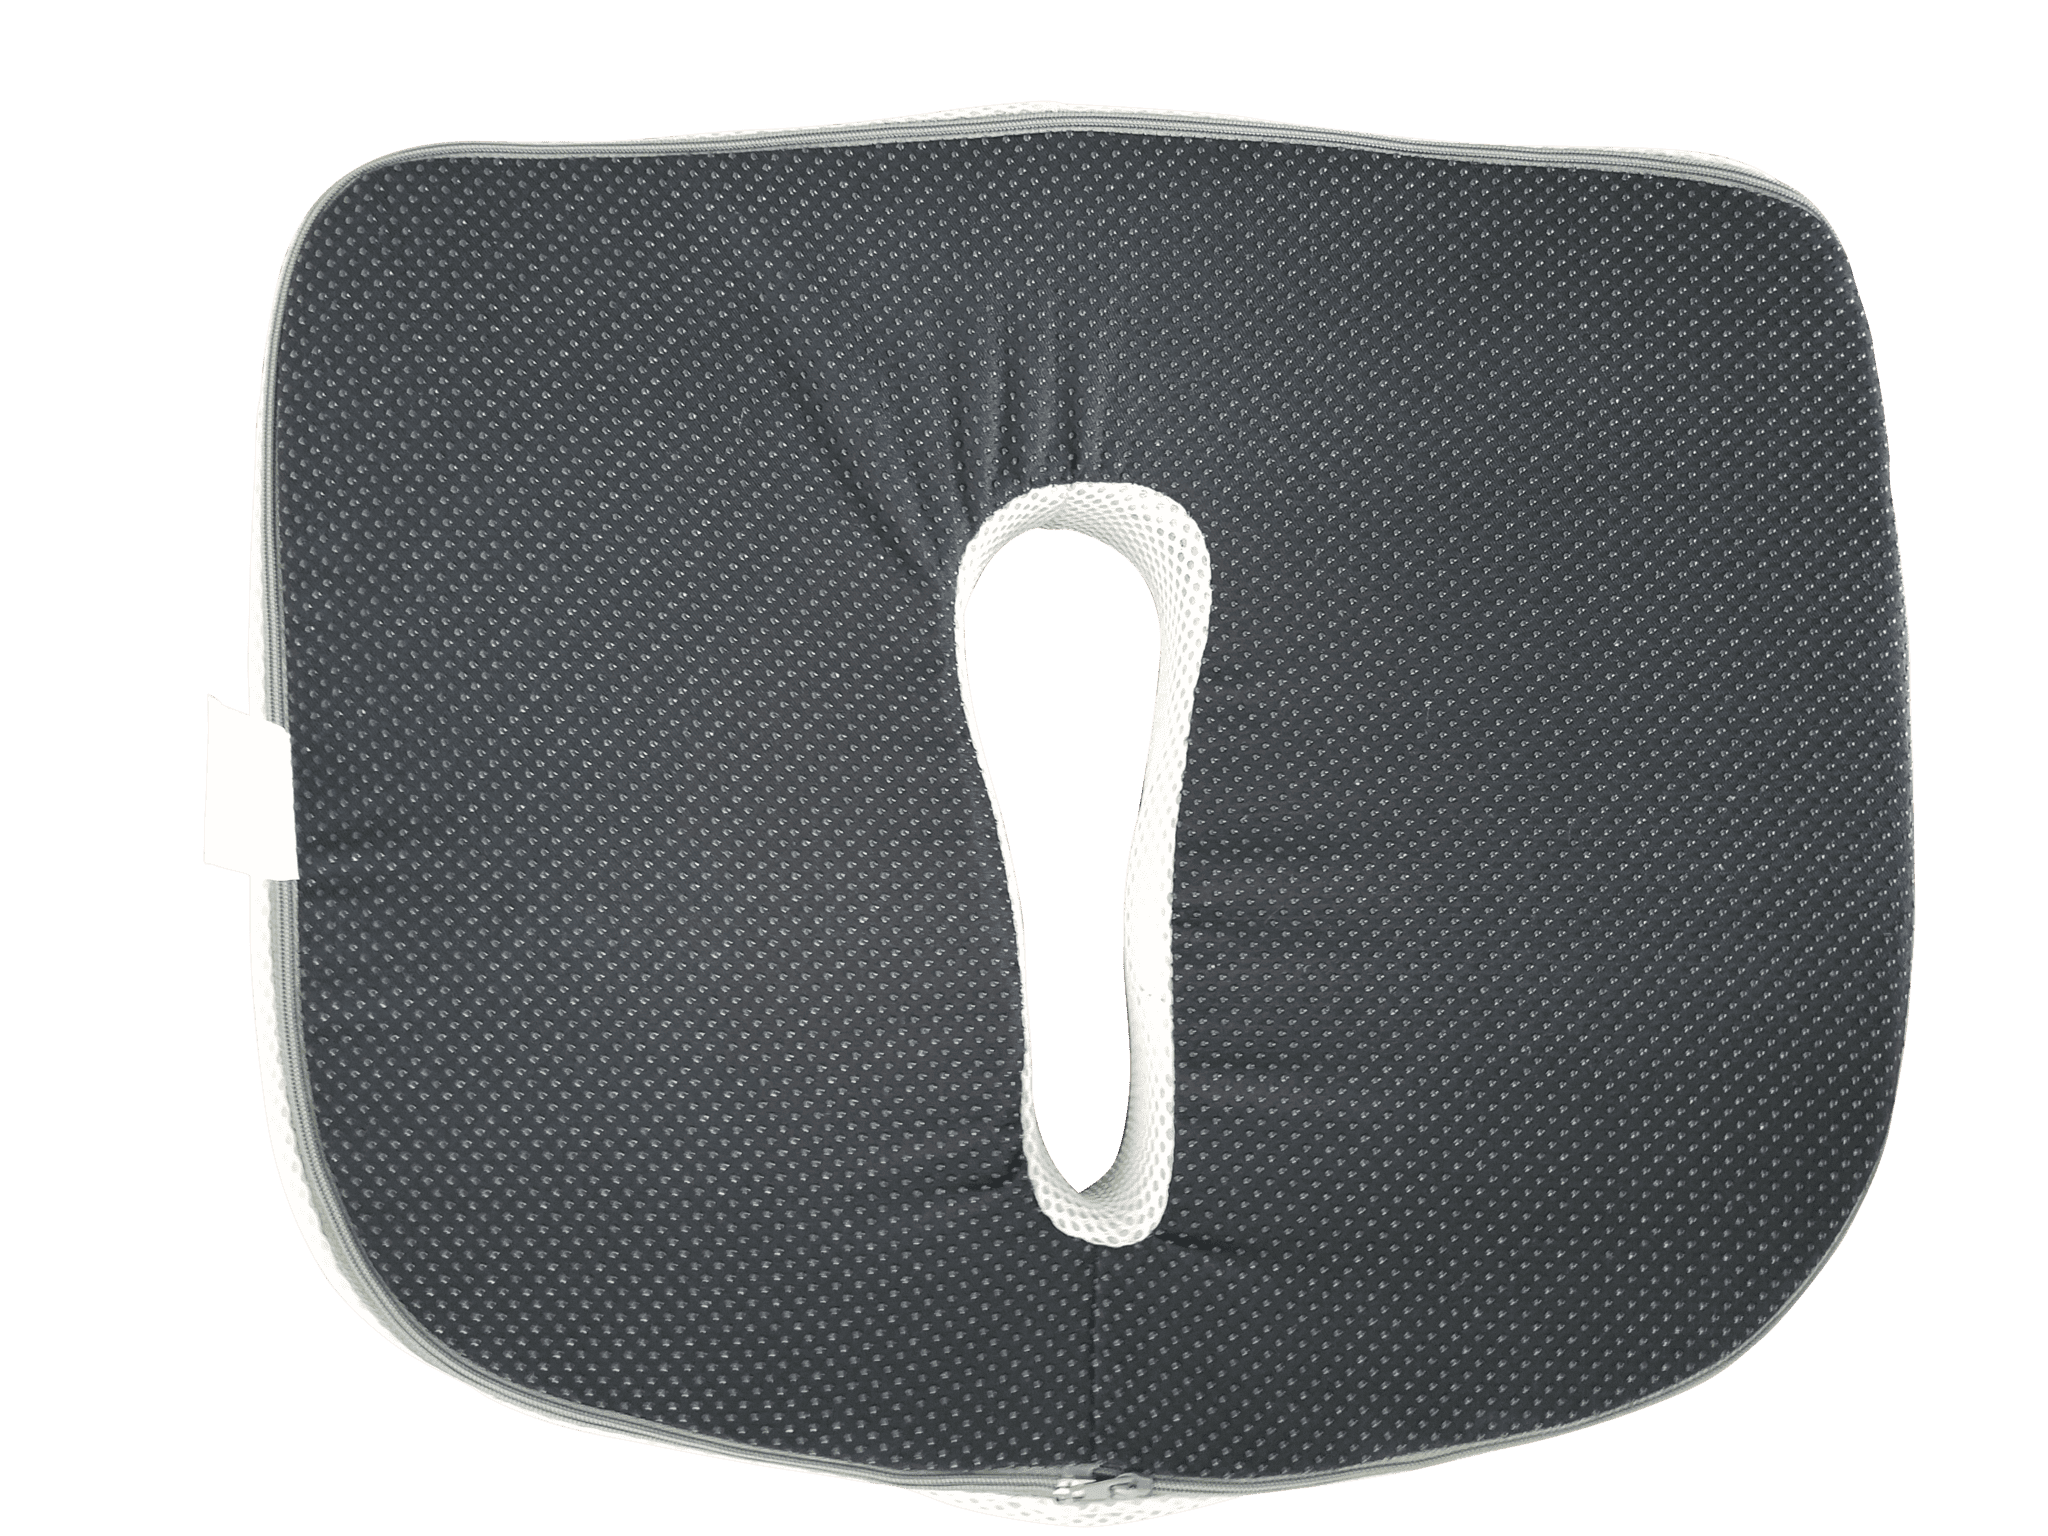 Lumbar Support Medical Seat Cushion For Sale - Bael Wellness